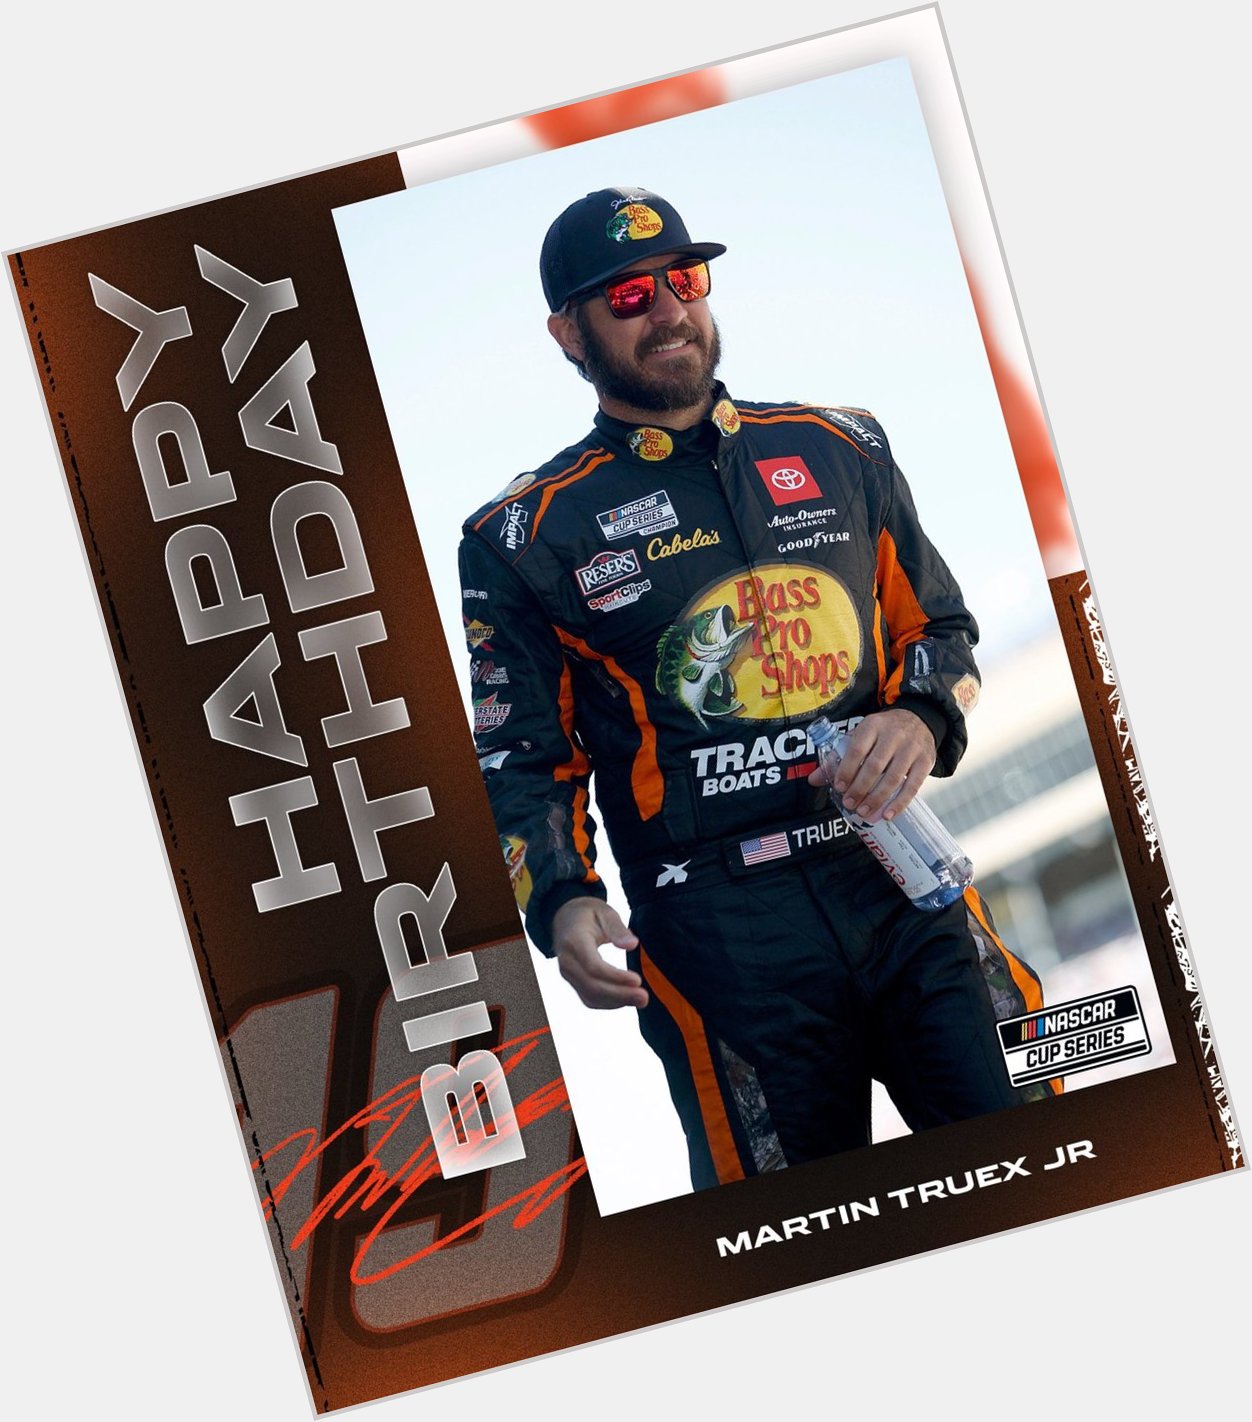 Today\s your day Martin Truex Jr!
Happy birthday to the driver of the No. 19   